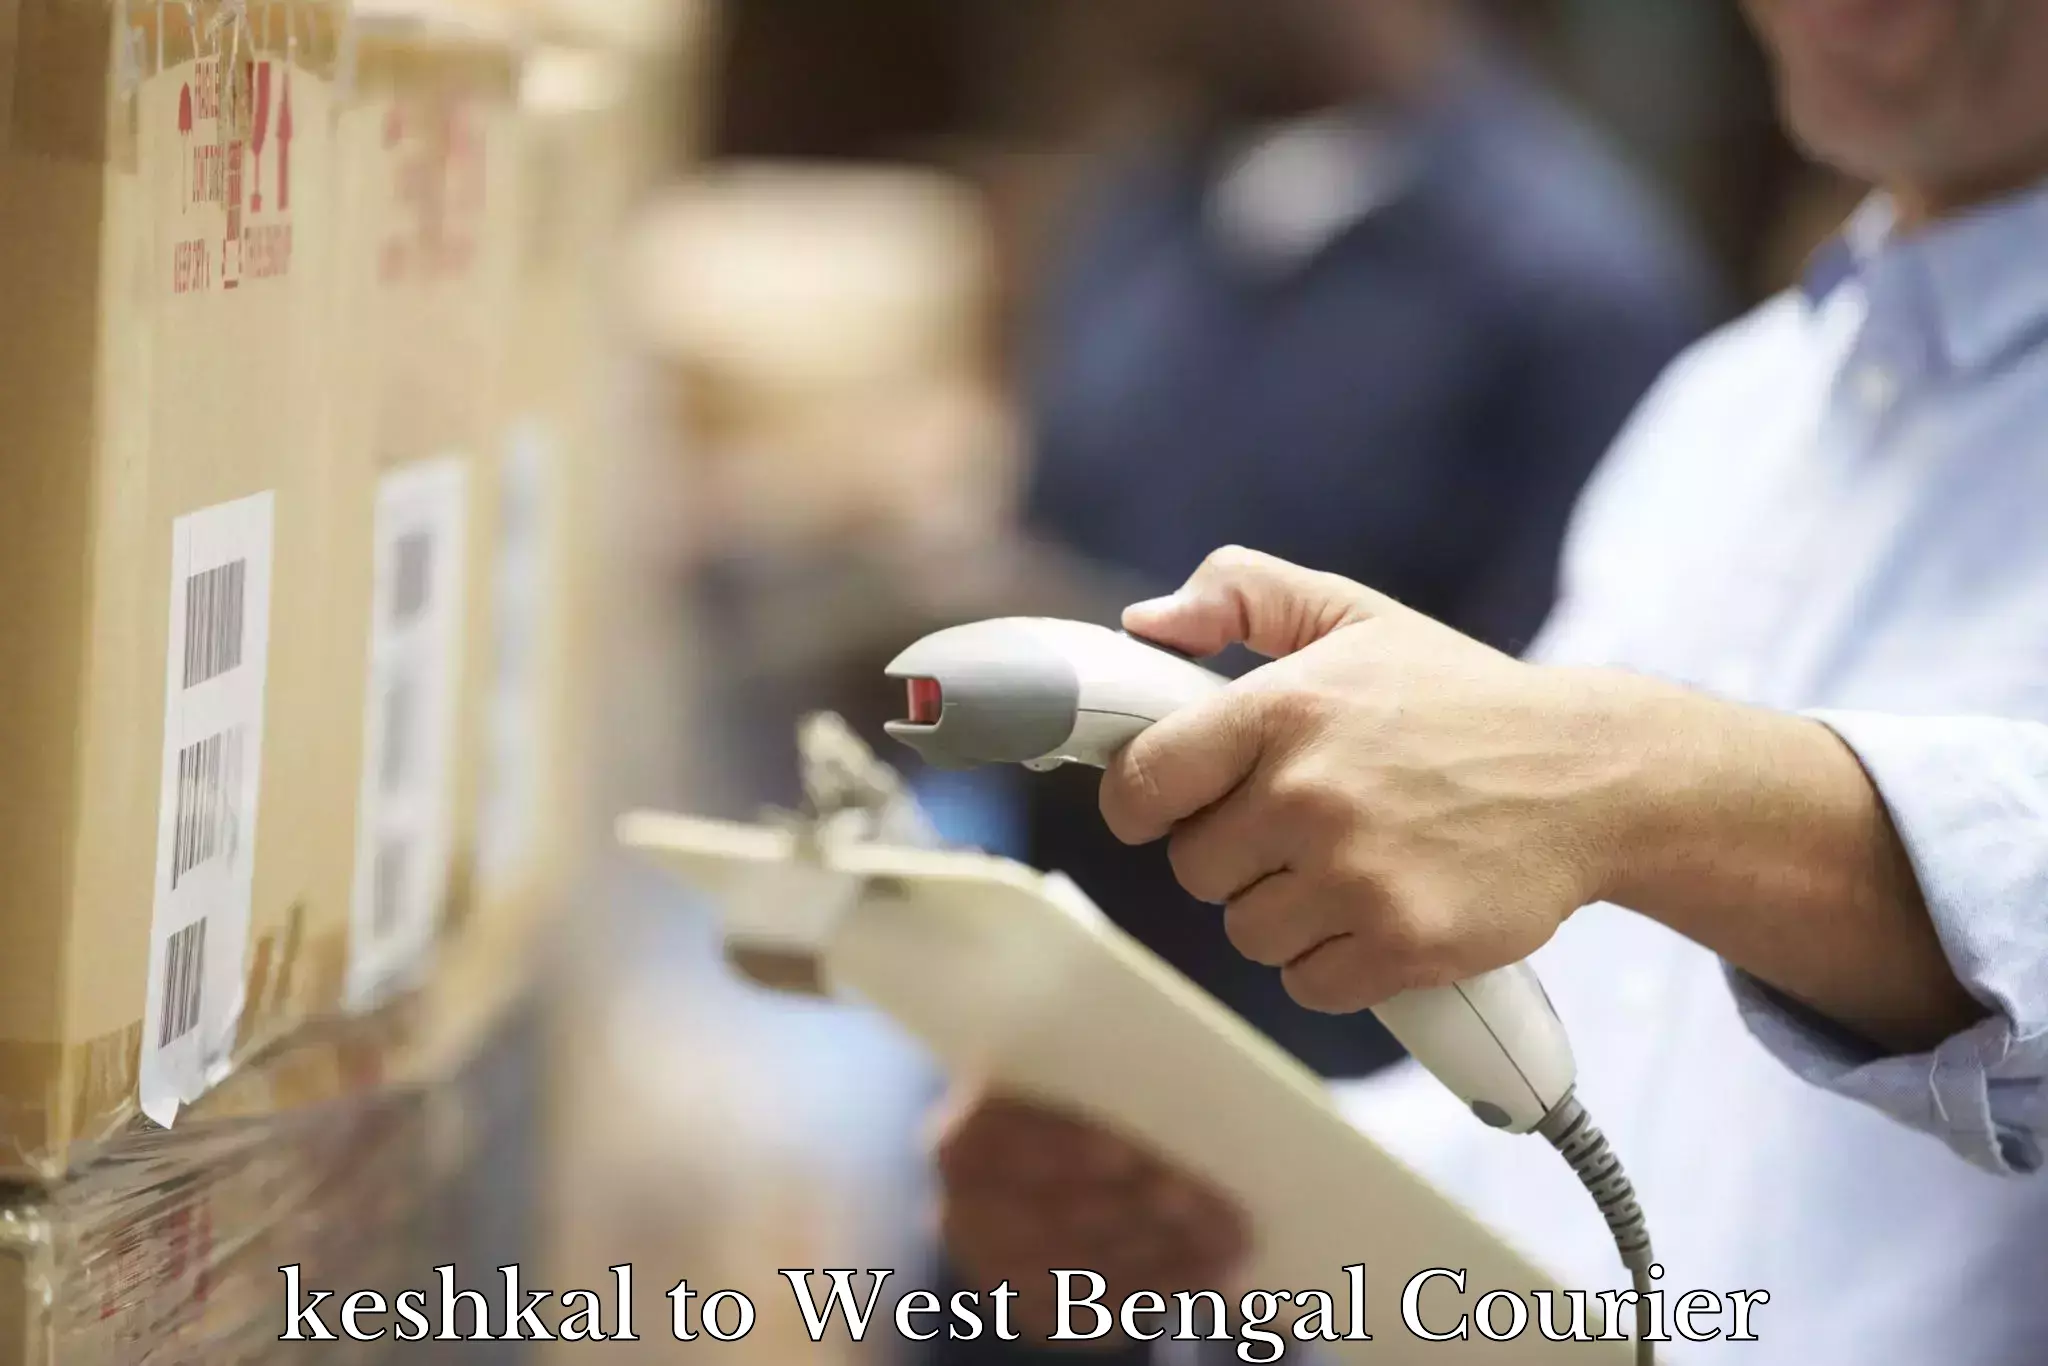 High-speed delivery keshkal to West Bengal